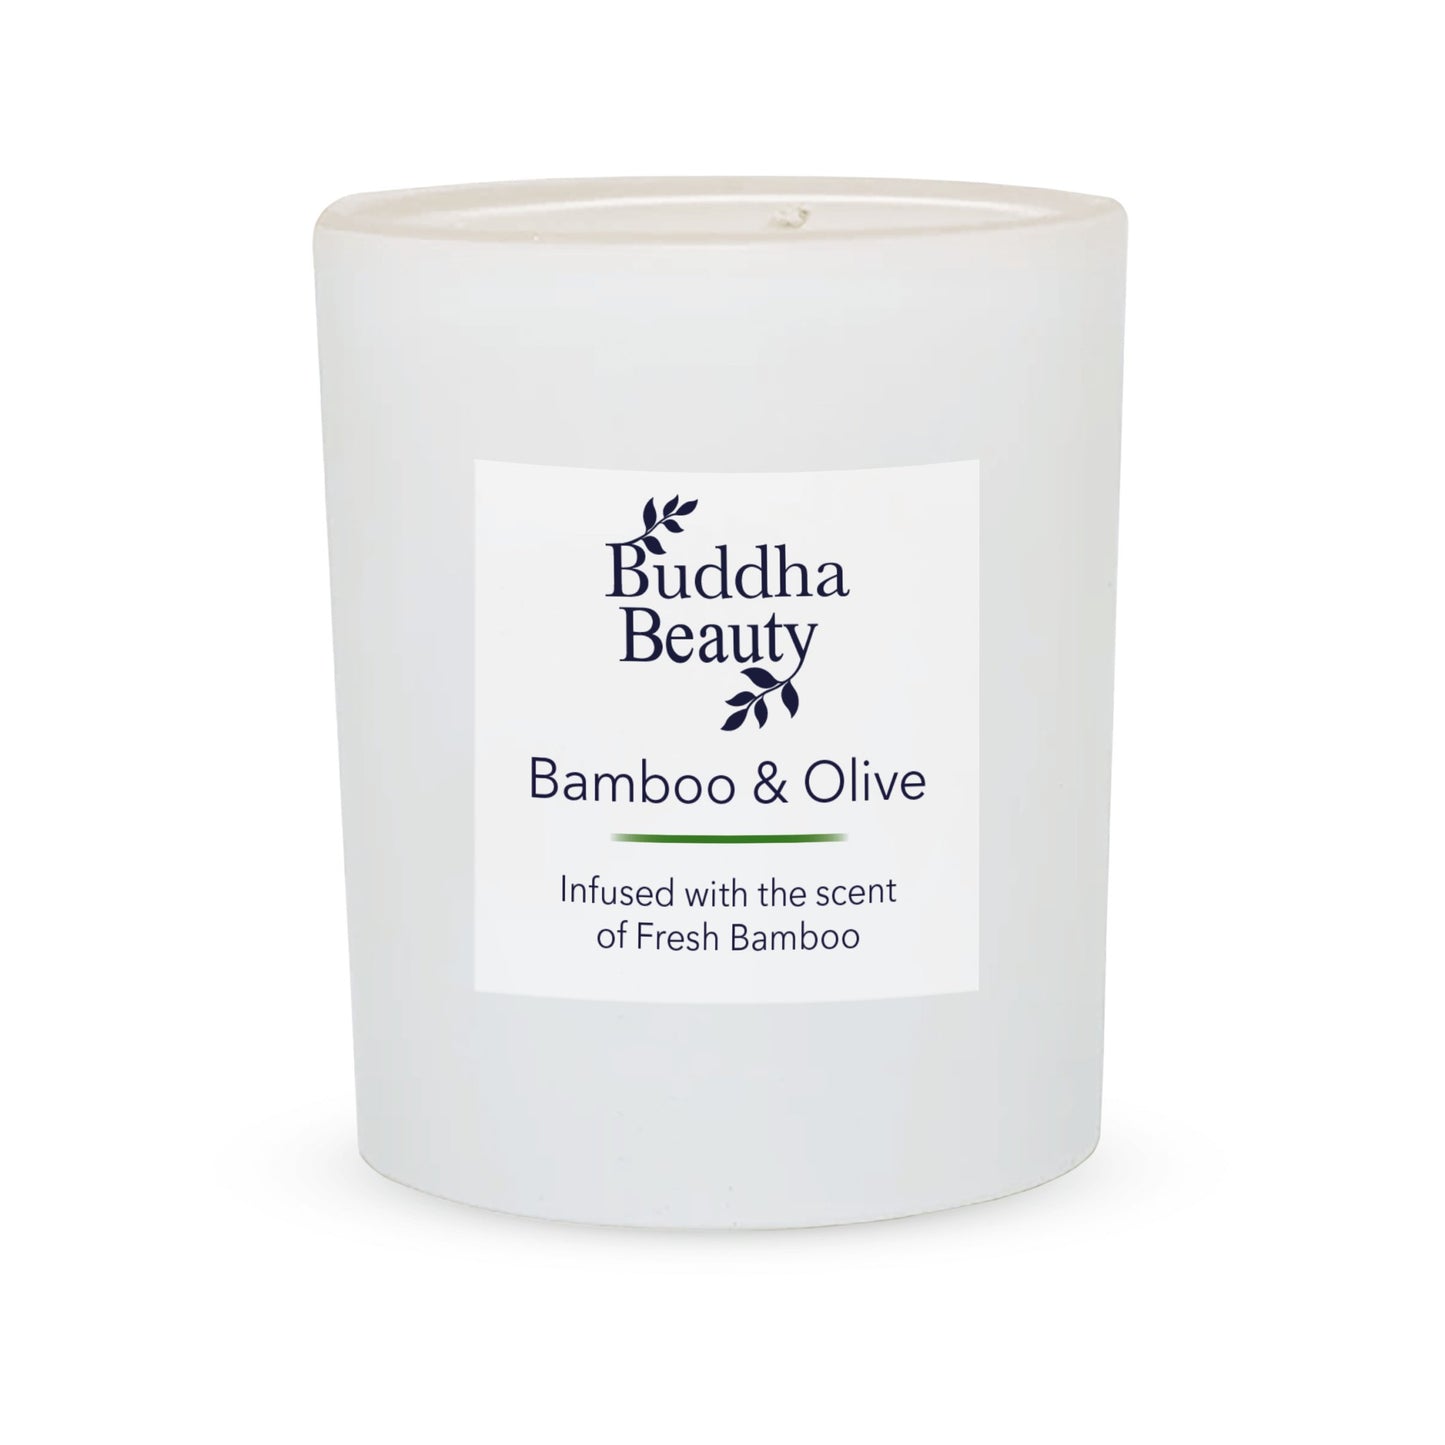 Bamboo & Olive Room Fragrance Collection - Buddha Beauty Skincare Room Candle #vegan# #cruelty-free# #skincare#